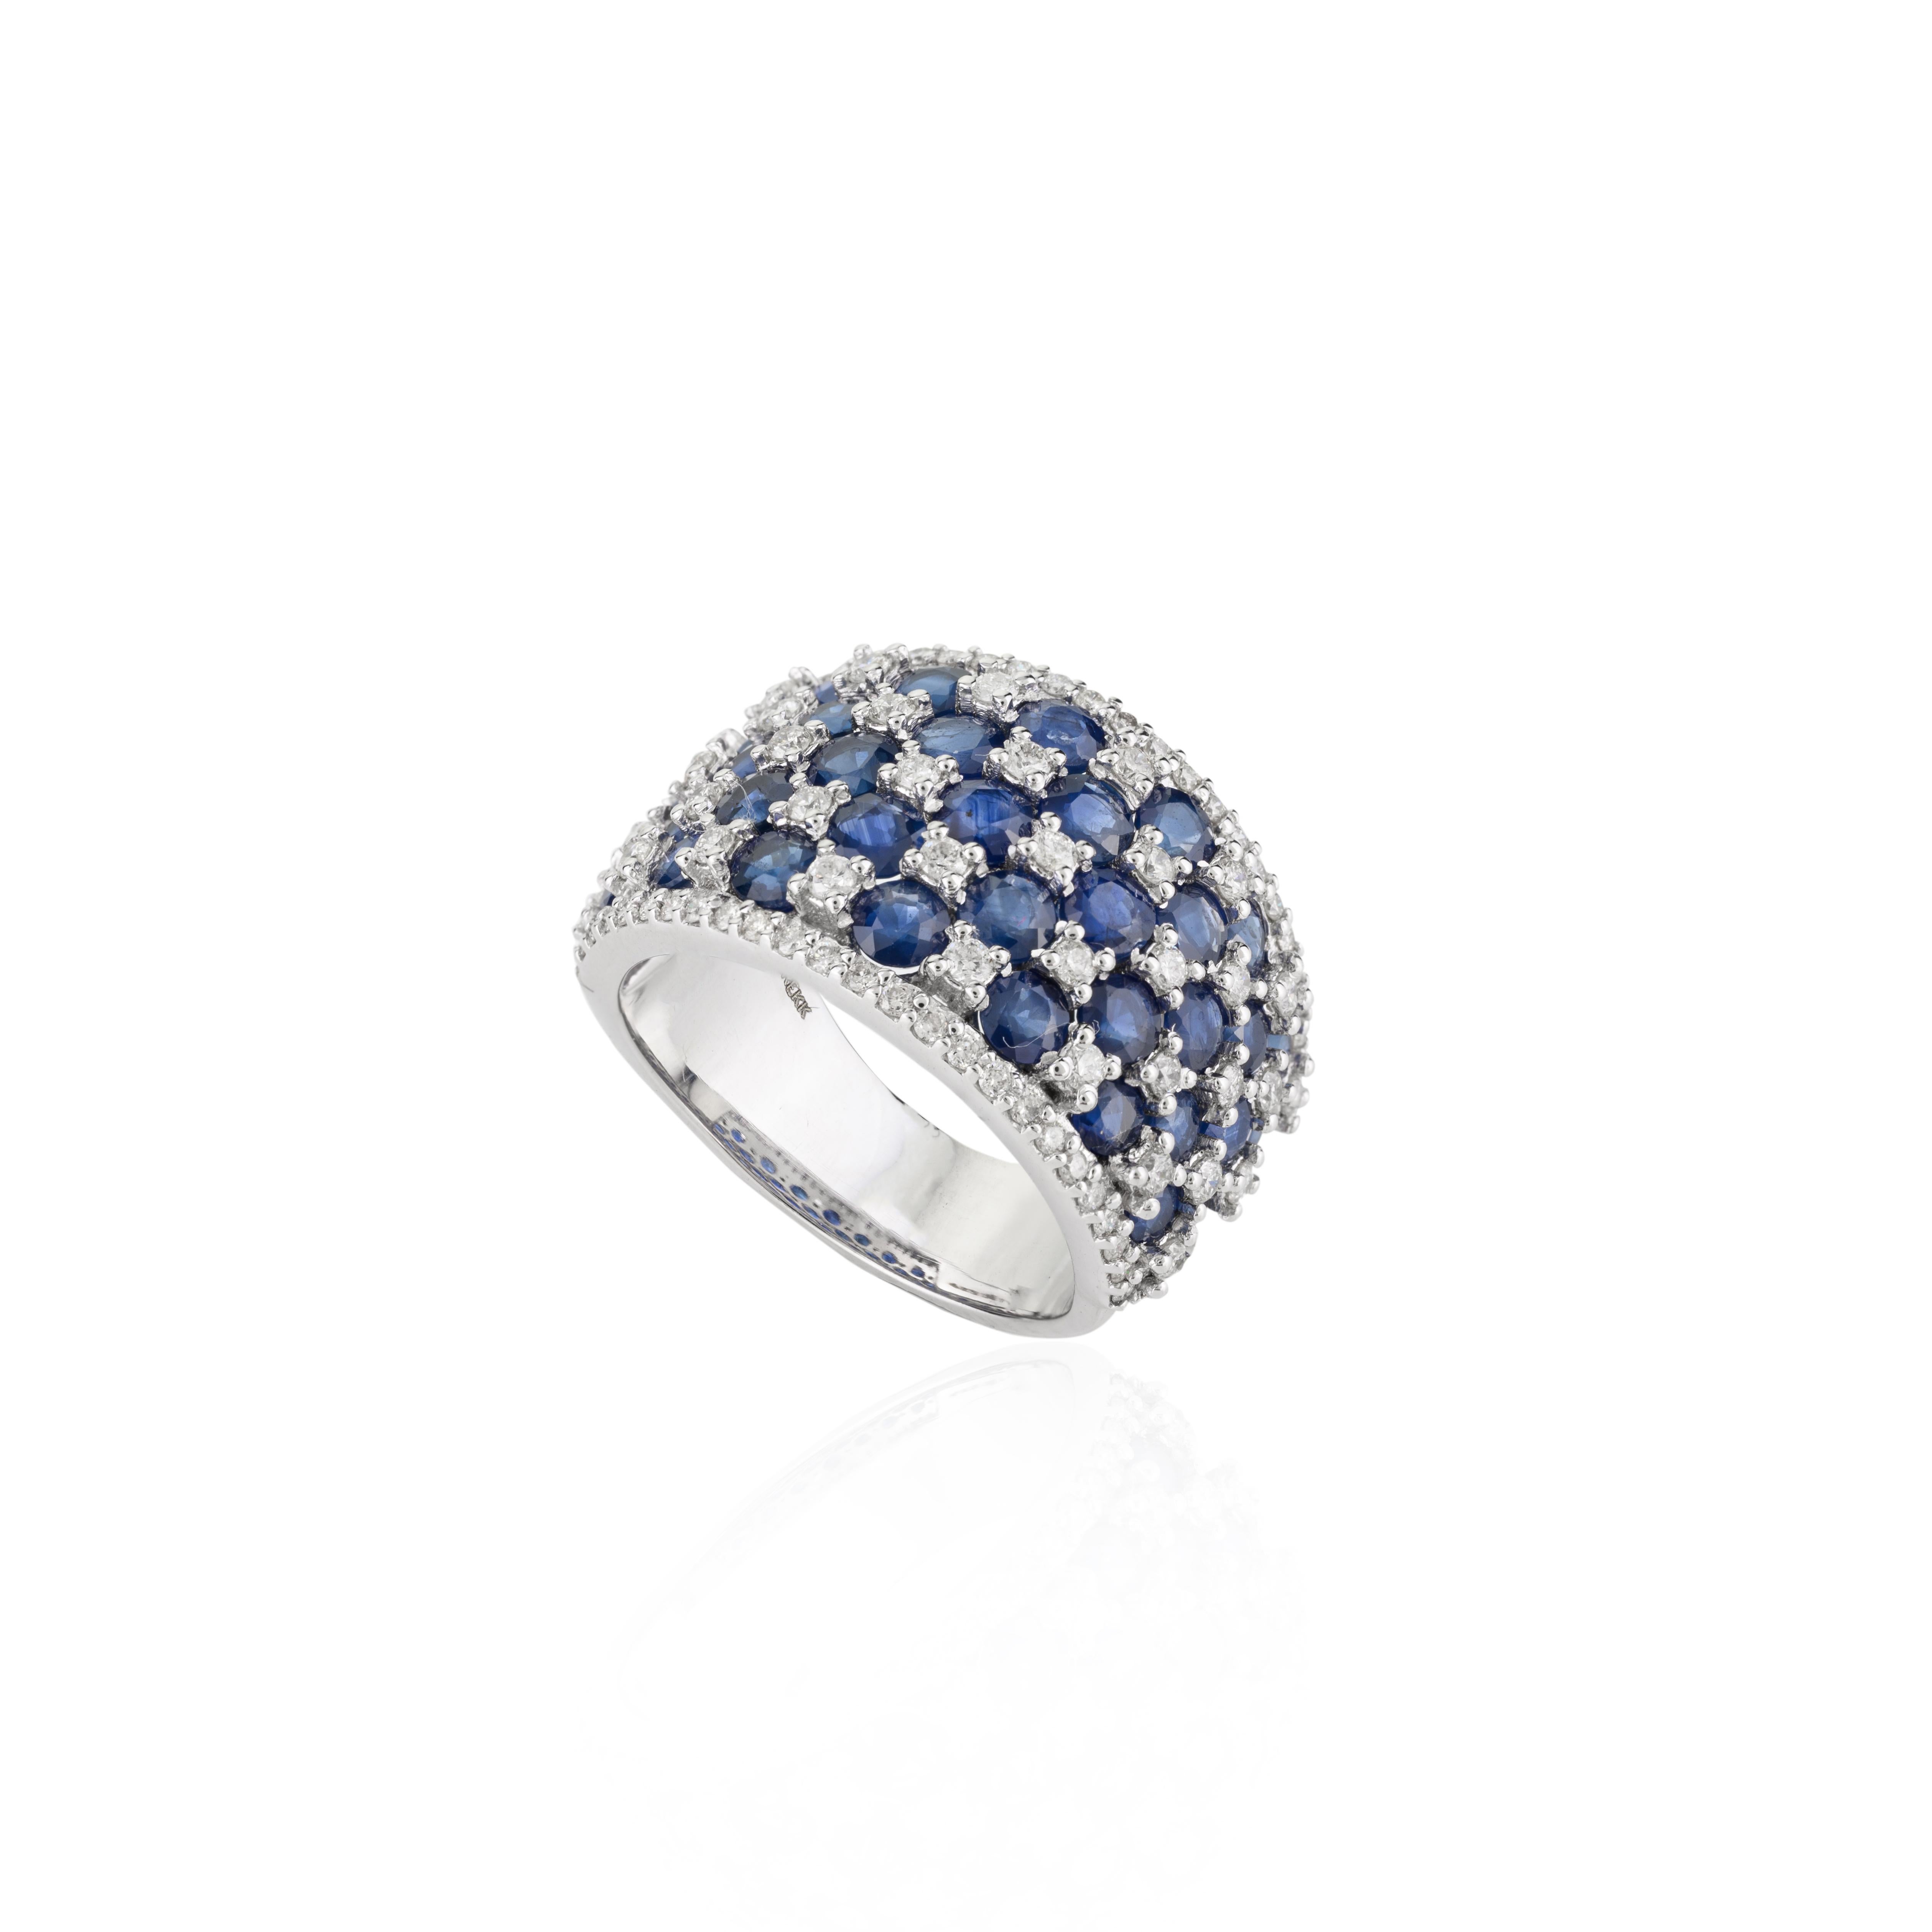 For Sale:  Stunning 4.11 CTW Sapphire Diamond Wide Cocktail Band Ring in 18k White Gold 9